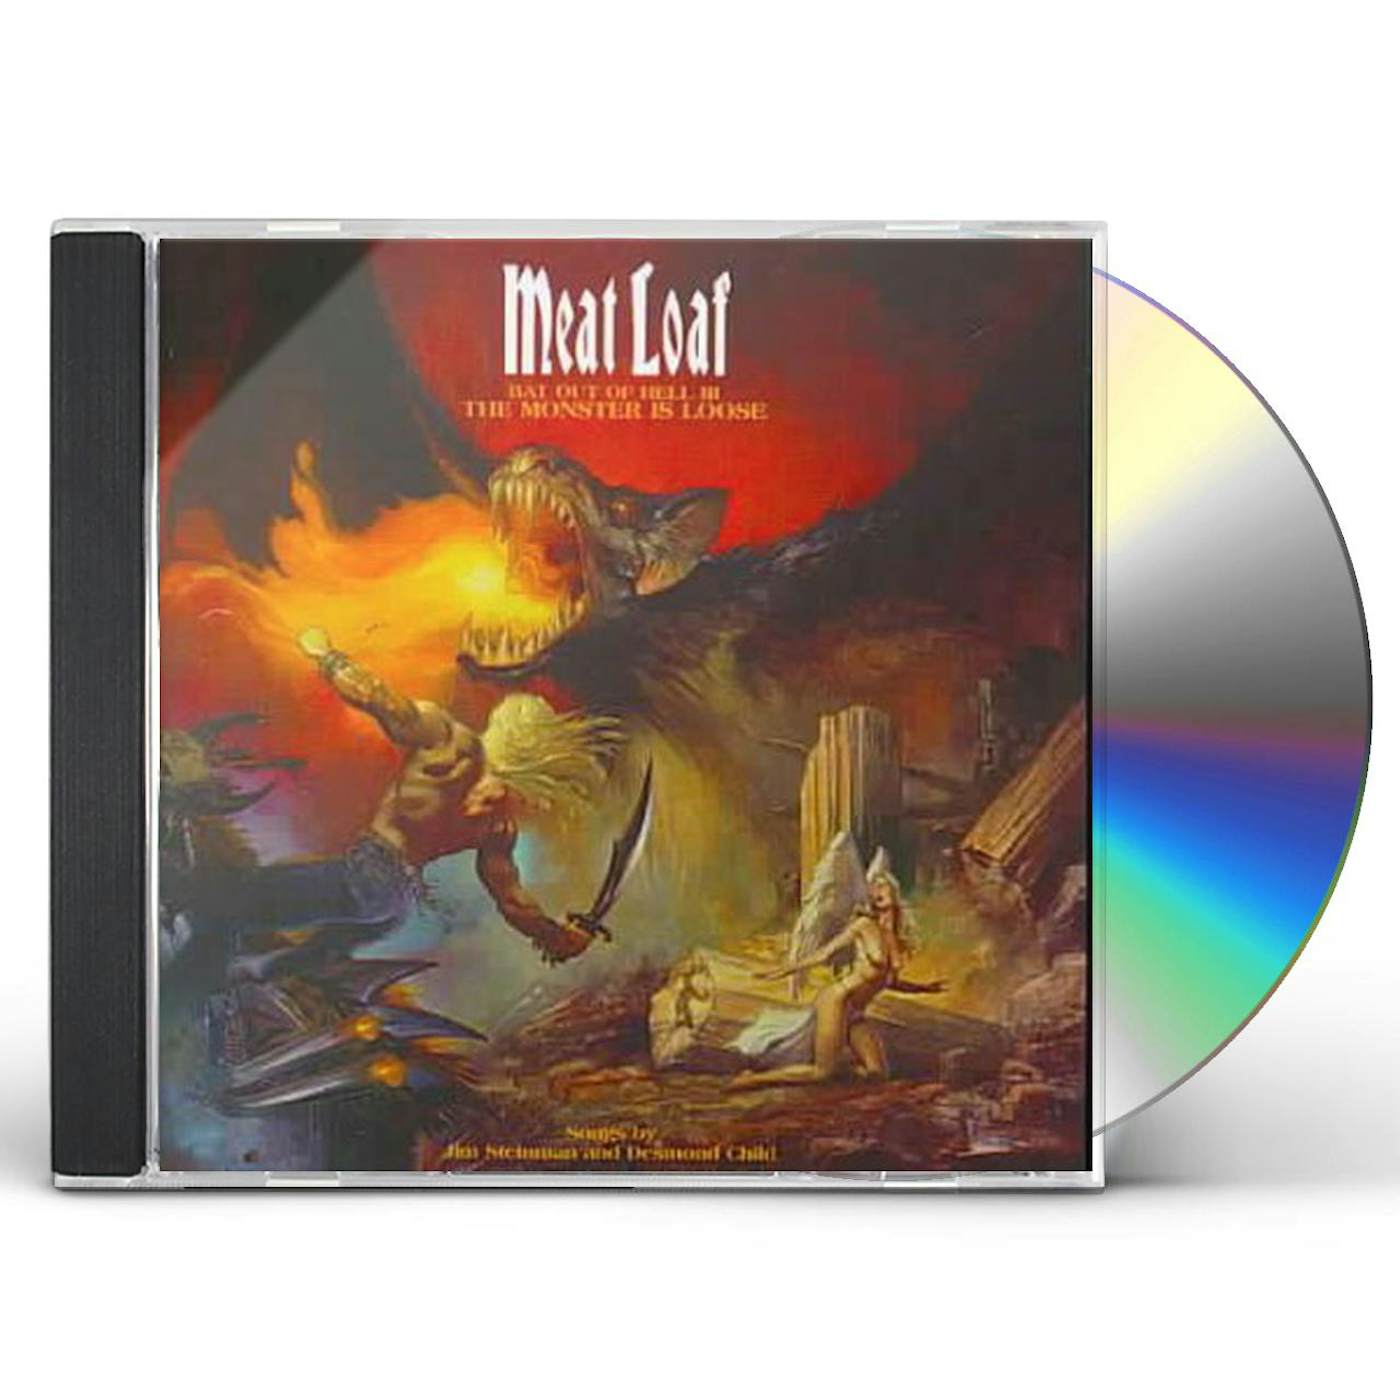 Meat Loaf BAT OUT OF HELL 3 CD